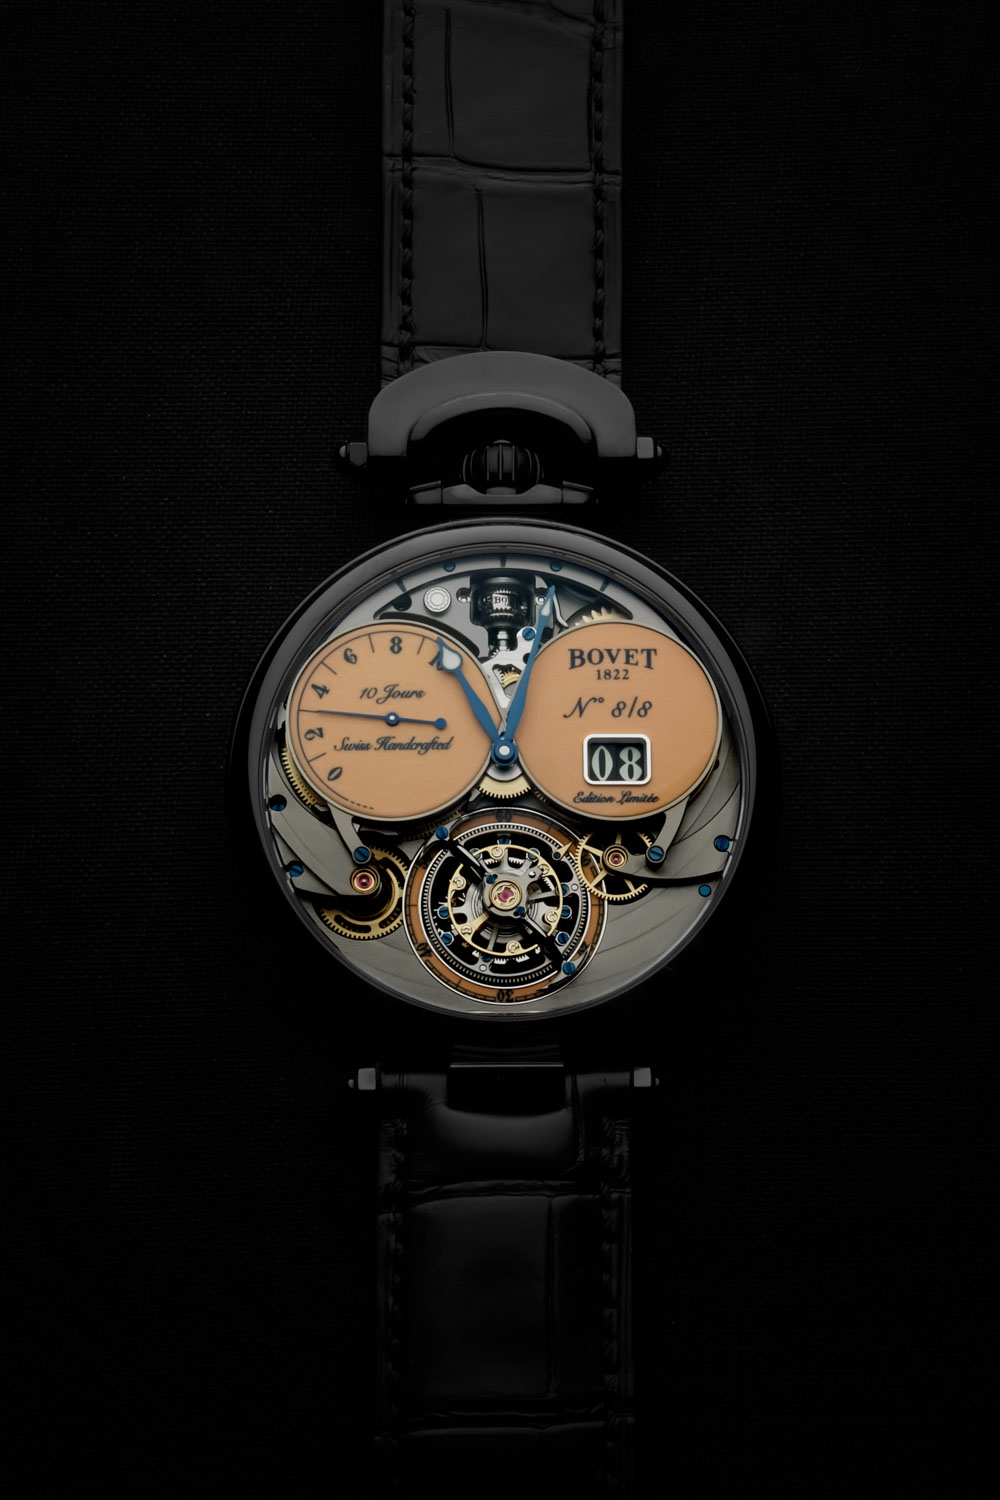 The Bovet 1822 Virtuoso VIII Chapter Two Reimagined in the light